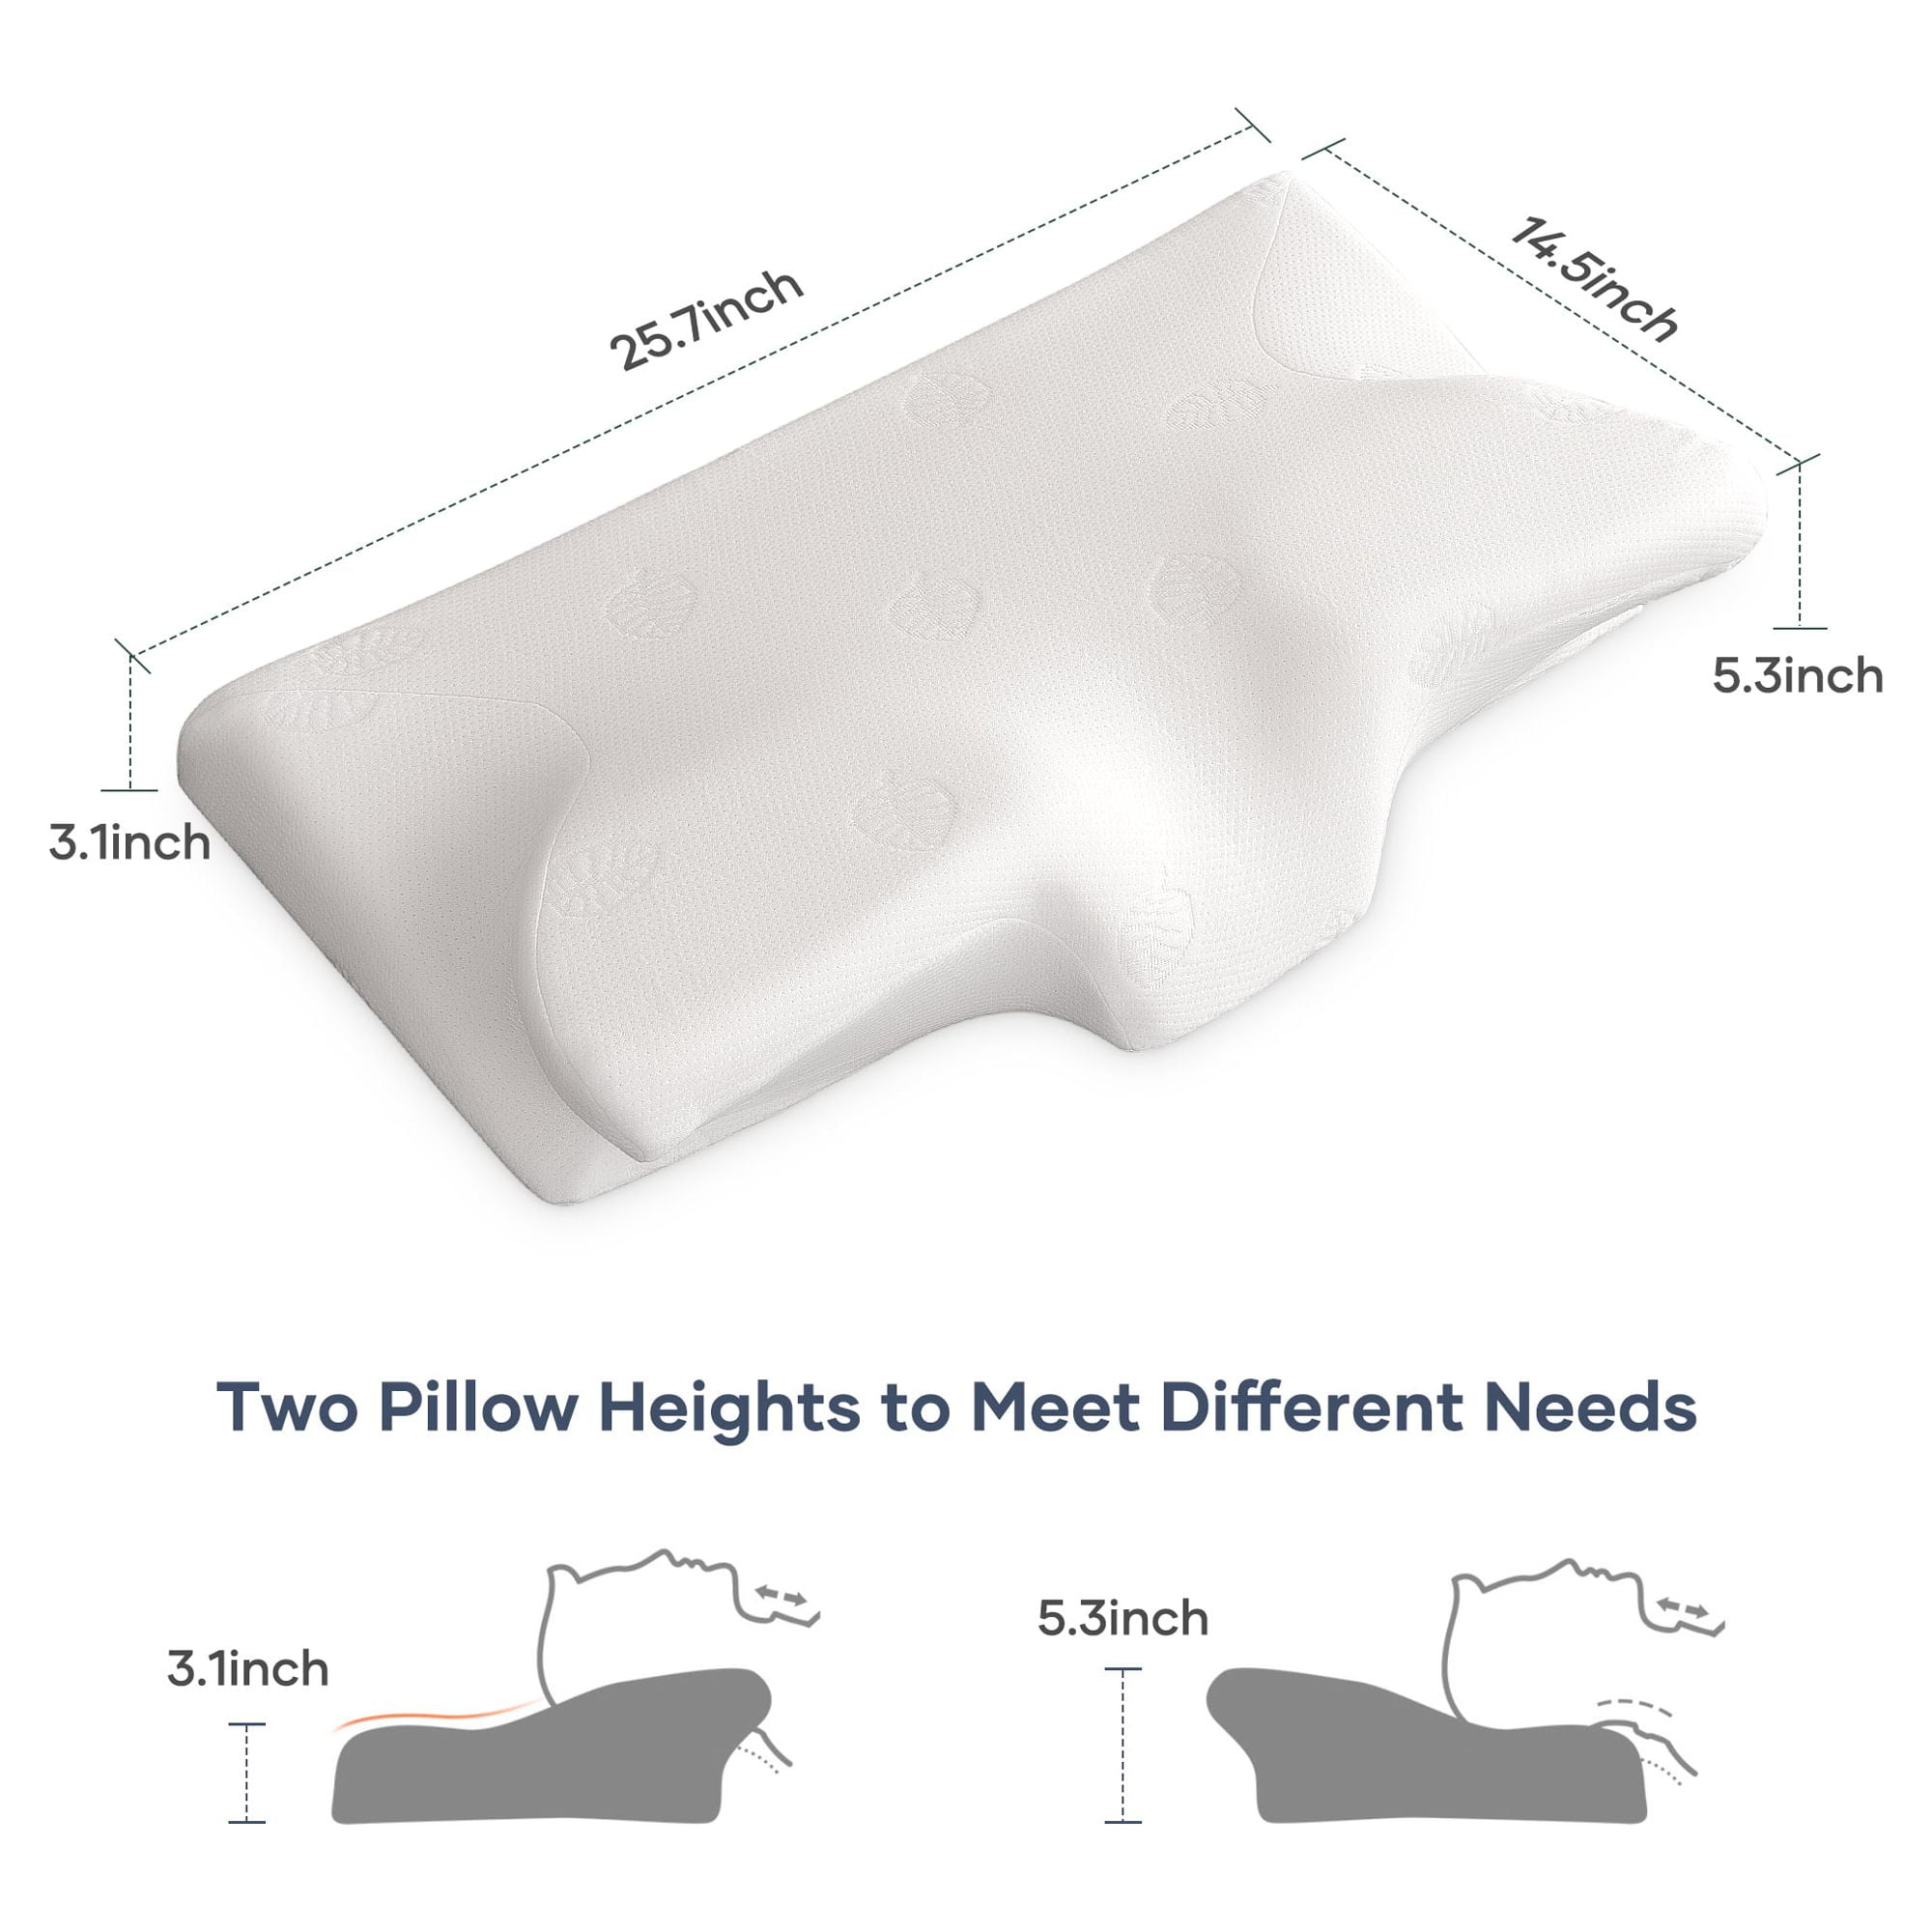 DREAMSIR SETORE Extra Firm Pillows for Sleeping,Neck Support Contour Pillow,Cervical,Orthopedic  Pillow for Neck